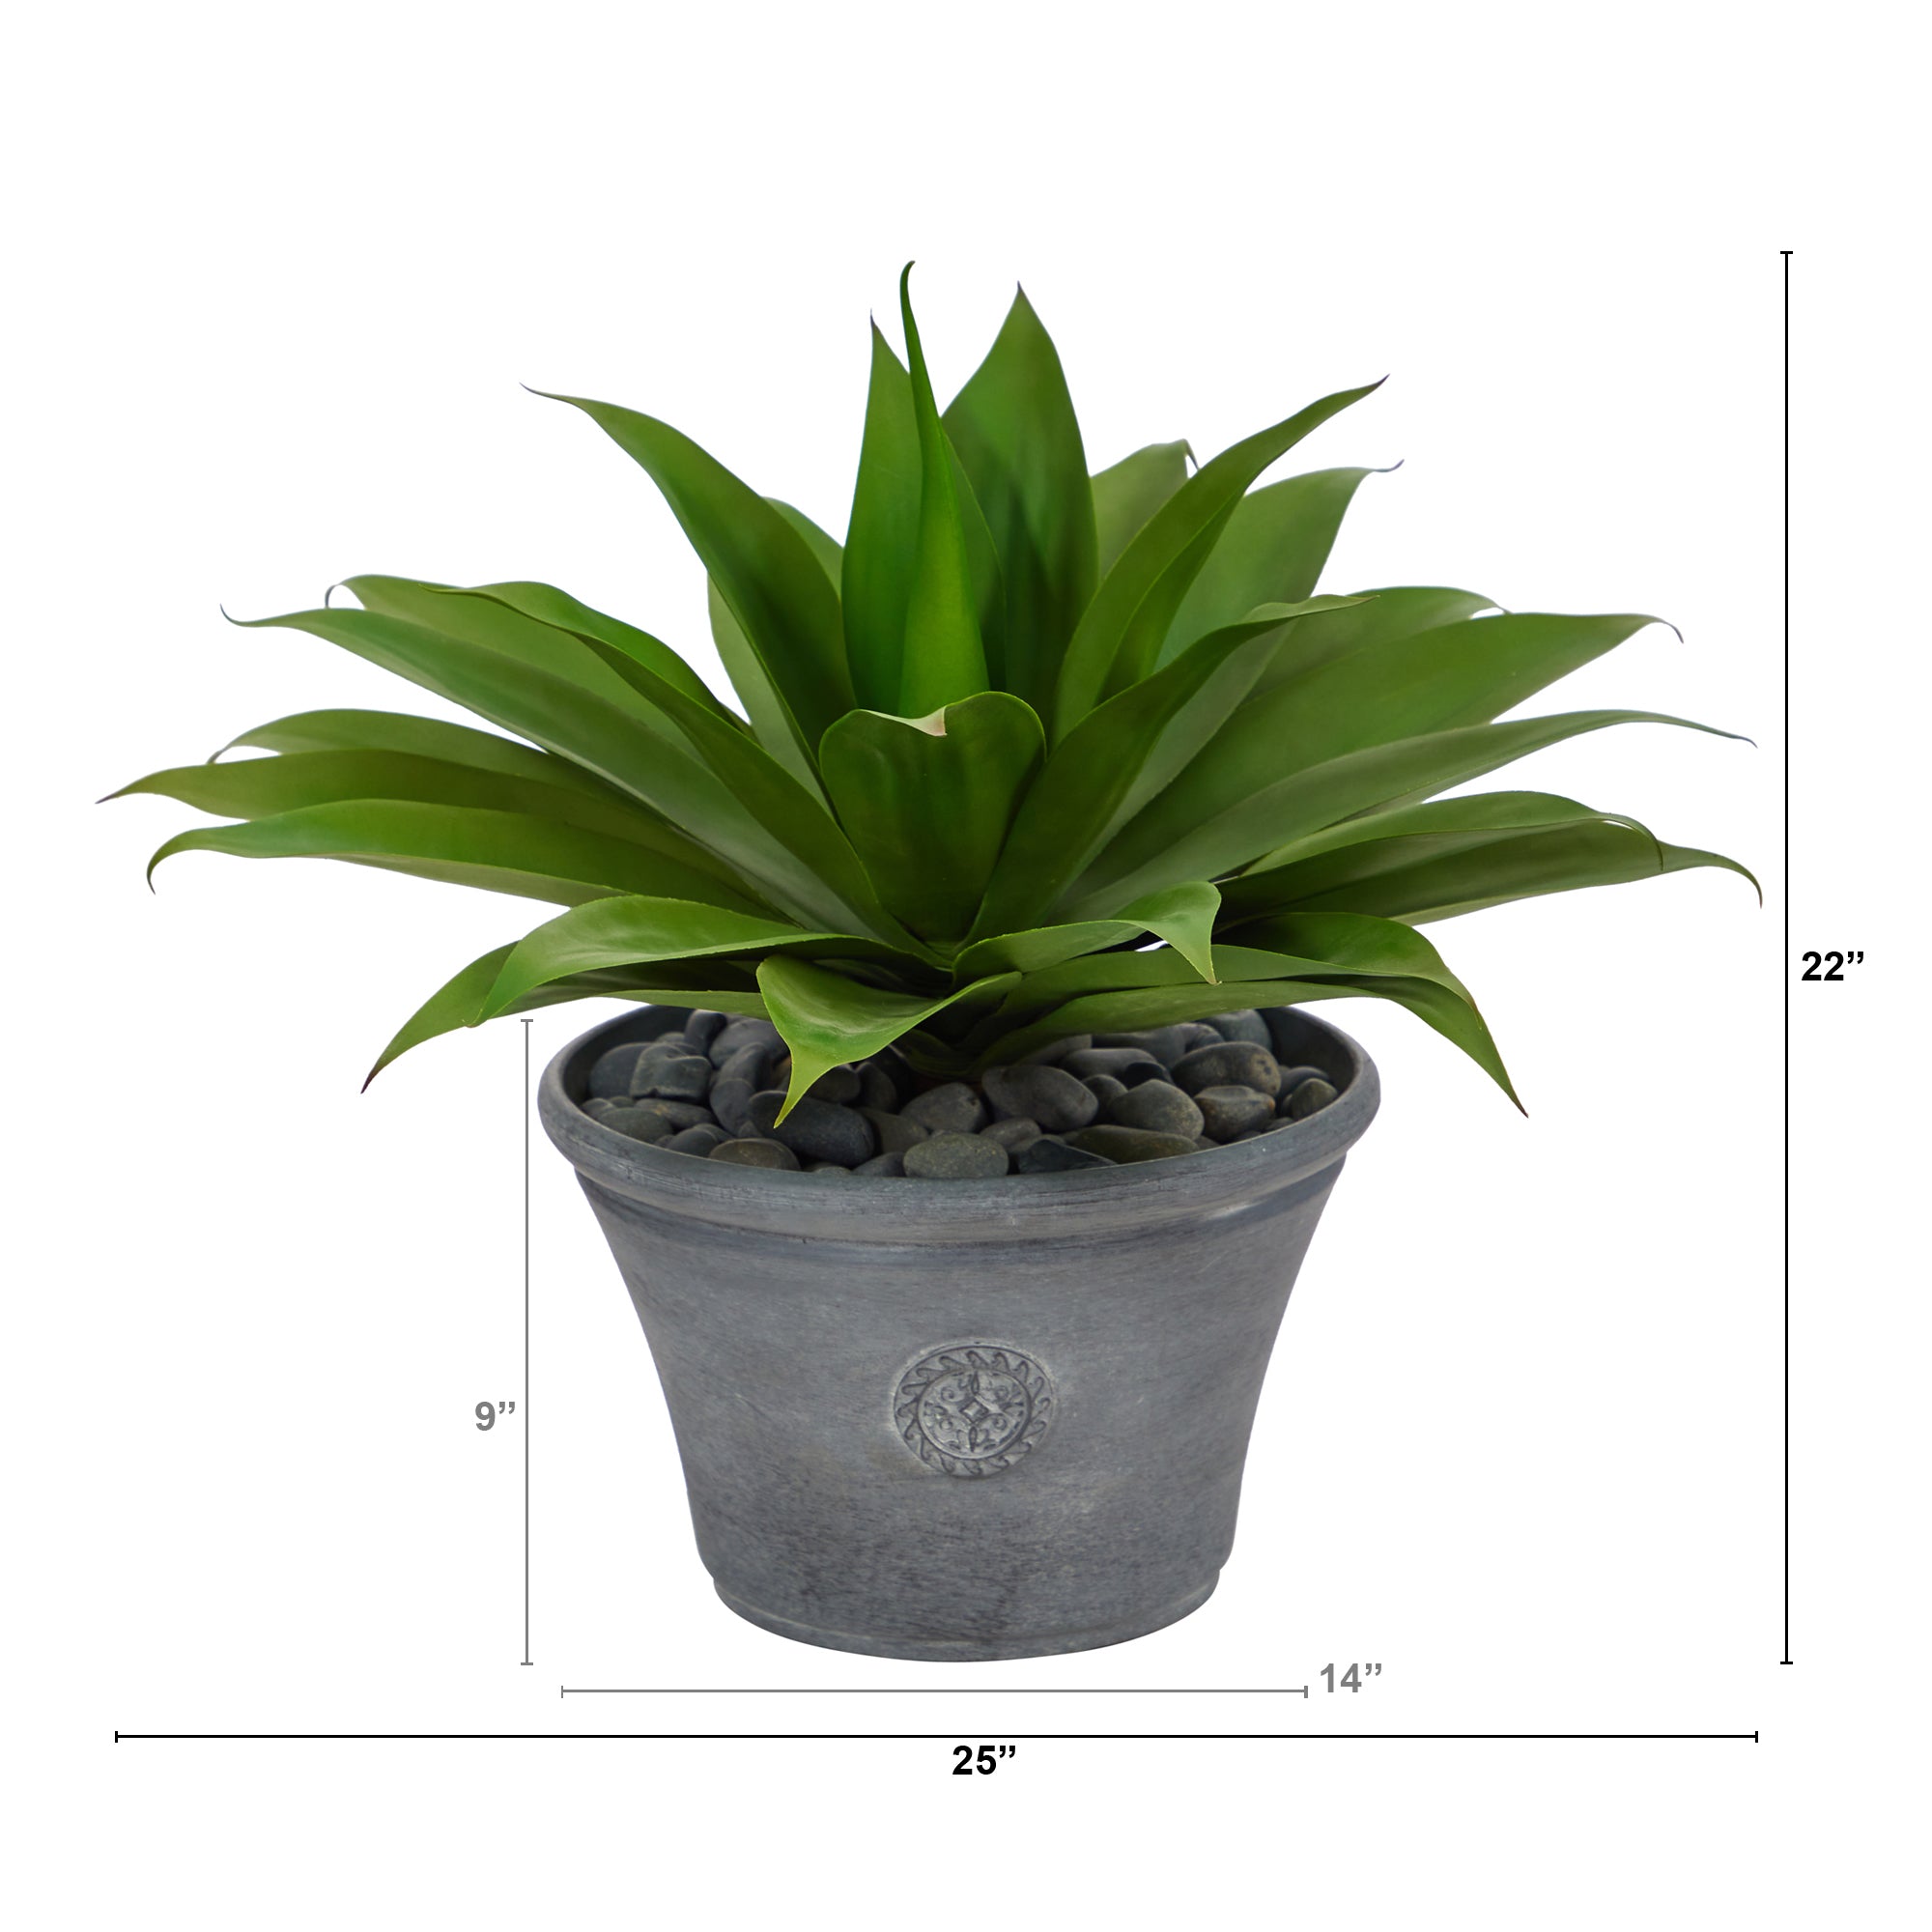 22” Agave Succulent Artificial Plant in Gray Planter